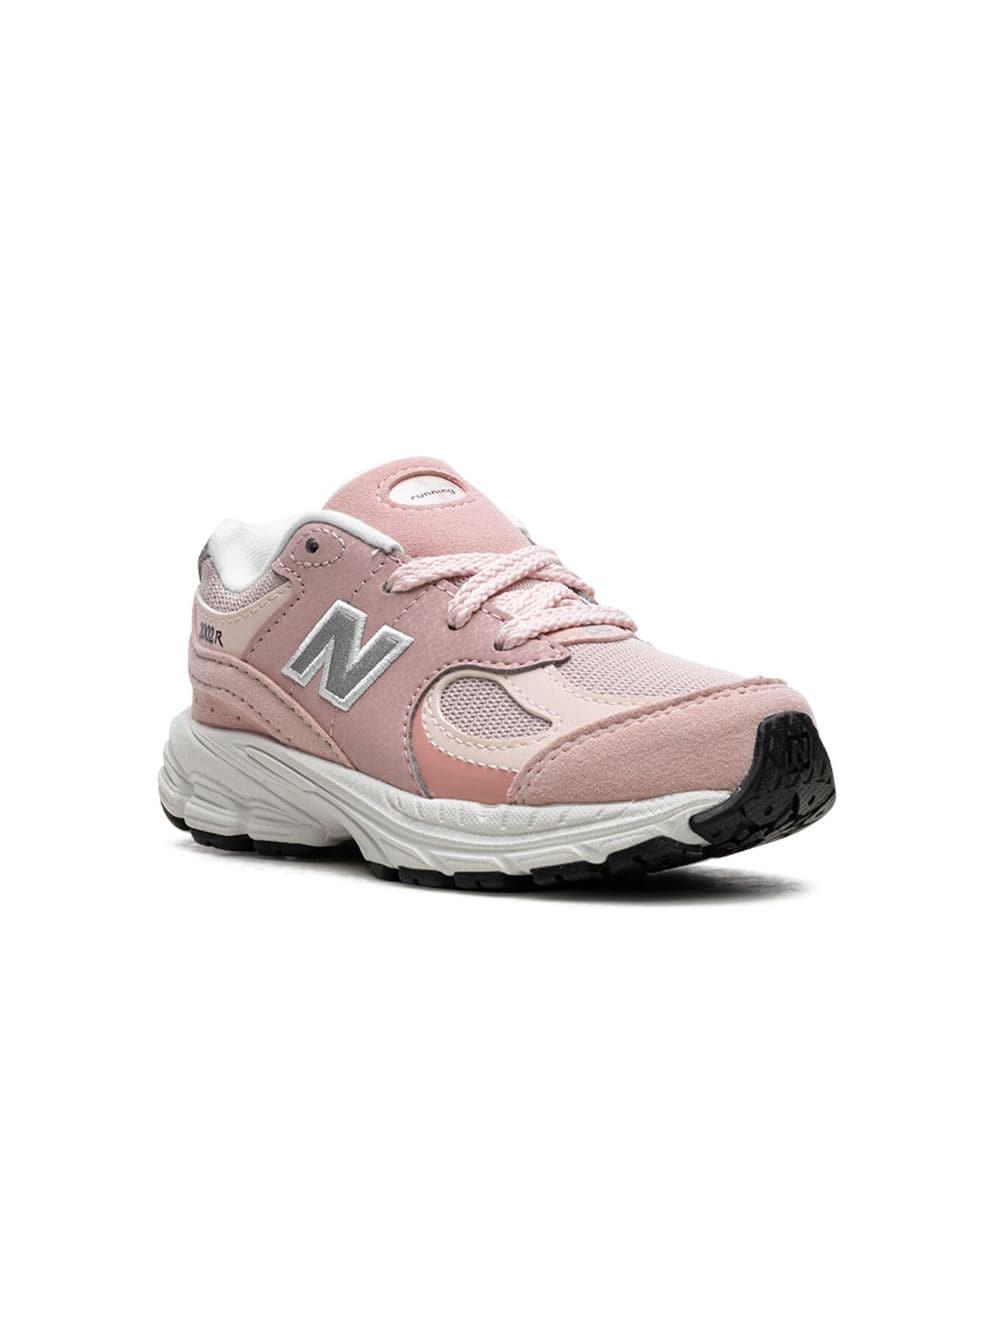 New Balance 2002 "Pink Rose" sneakers